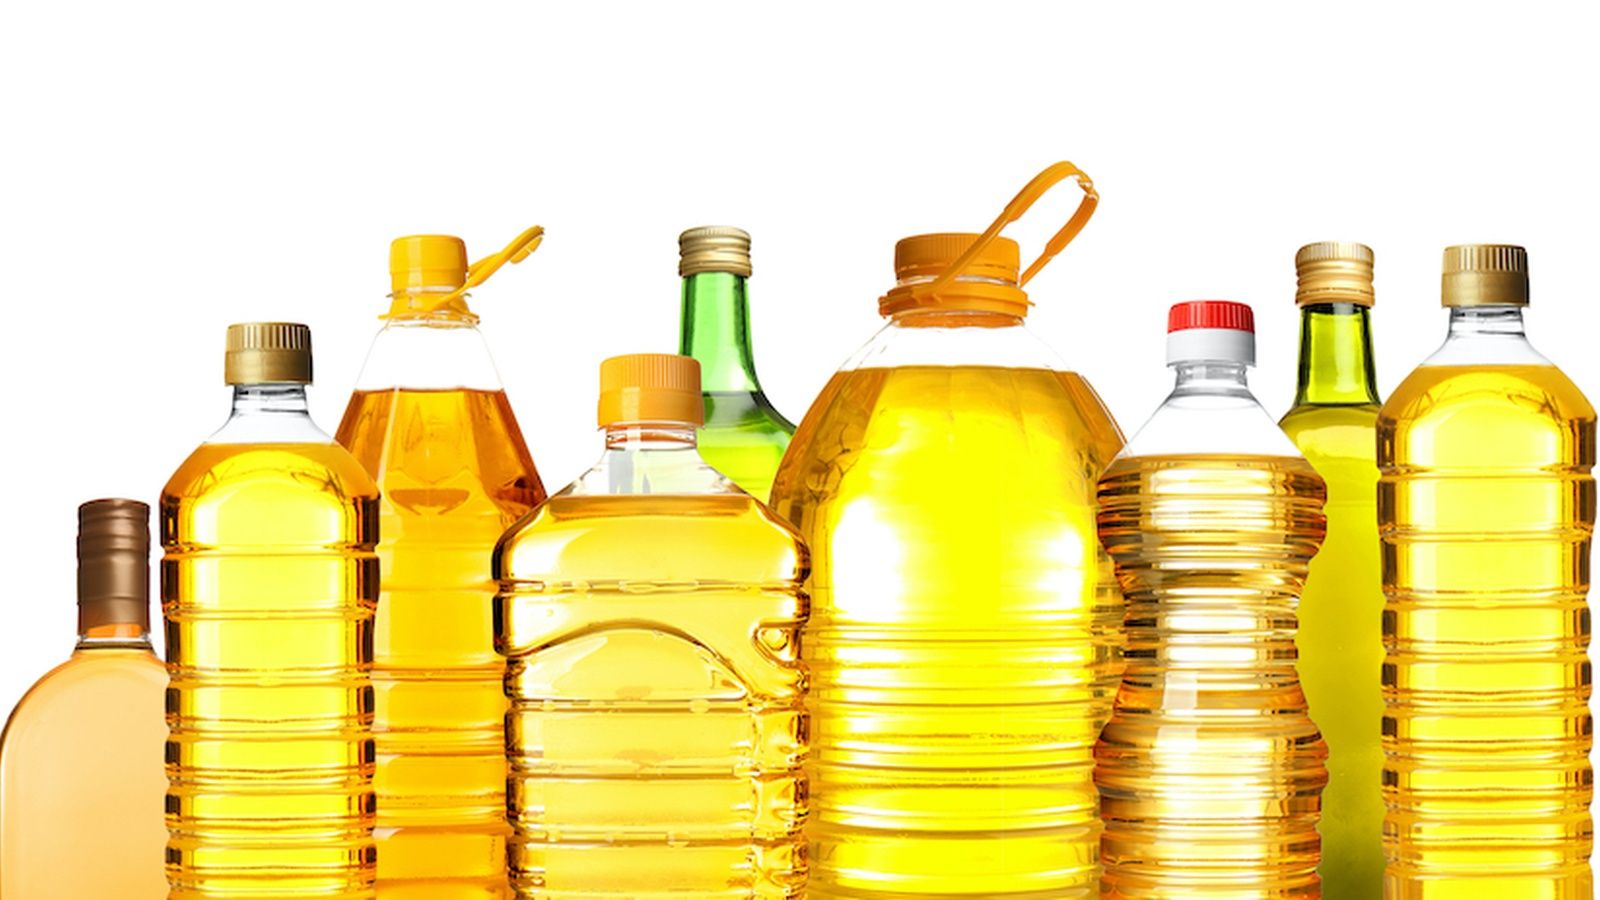 Cooking Vegetable Oil Releases Toxic Chemicals Linked To Cancer. FOOD MATTERS®